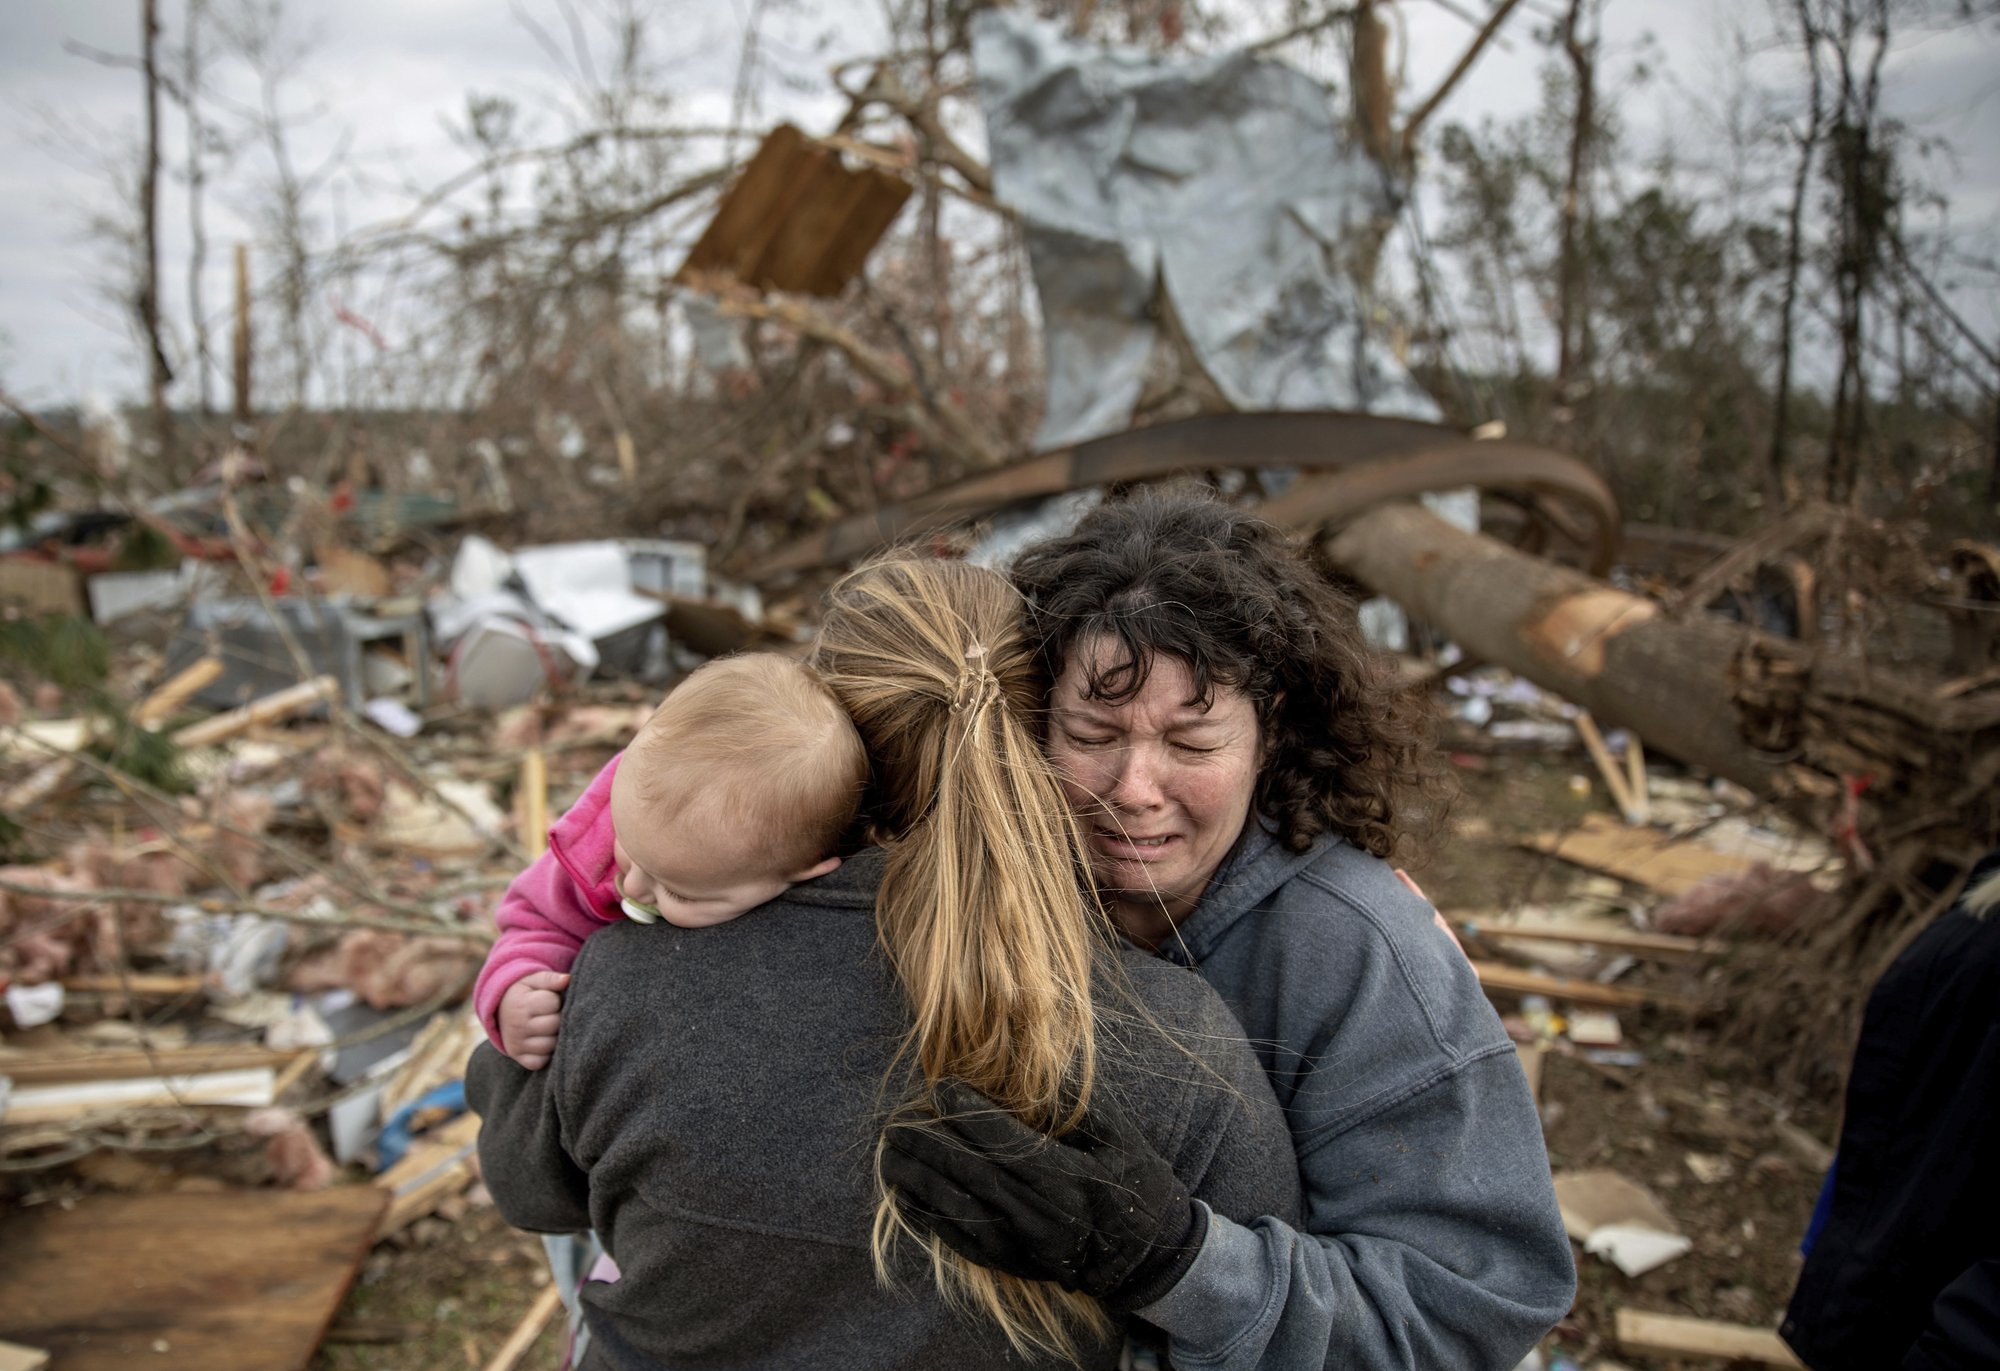 Carol Dean, right, cries while embraced by Megan Anderson and her 18-month-old daughter Madilyn, as Dean sifts through the debris of the home she shared with her husband, David Wayne Dean, who died when a tornado destroyed the house in Beauregard, Ala., on Monday, March 4, 2019. Photo: AP